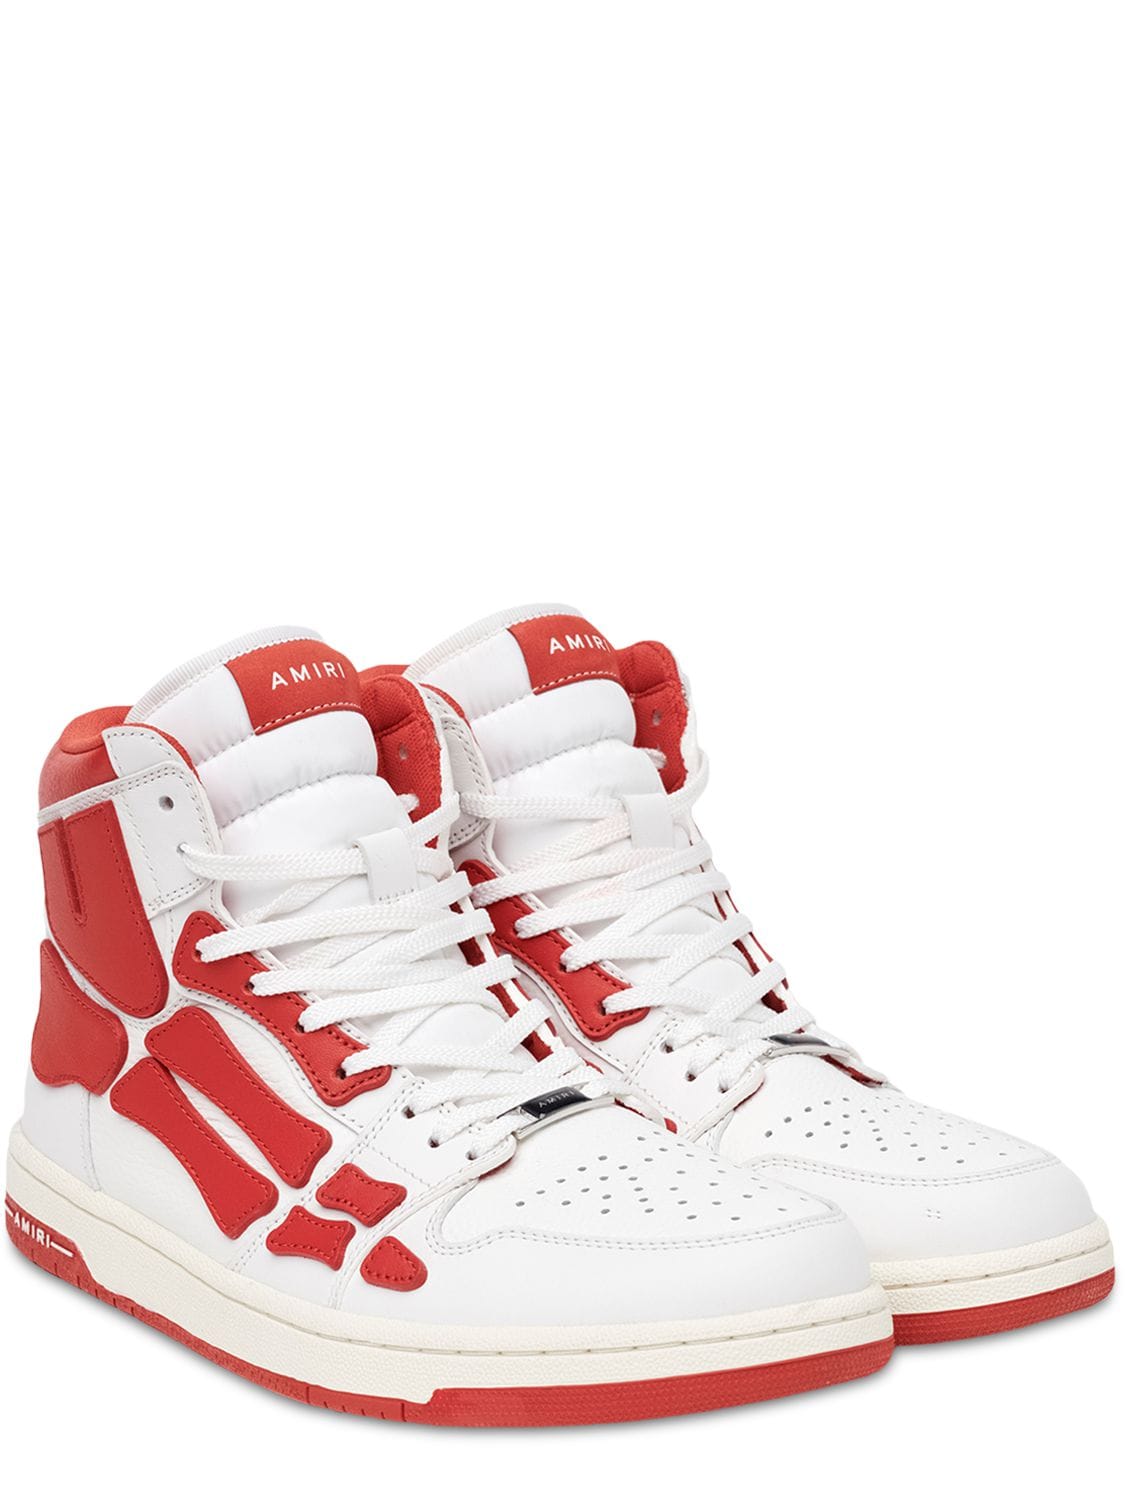 AMIRI SKEL-TOP HIGH LEATHER trainers,74IXV9004-MTI00